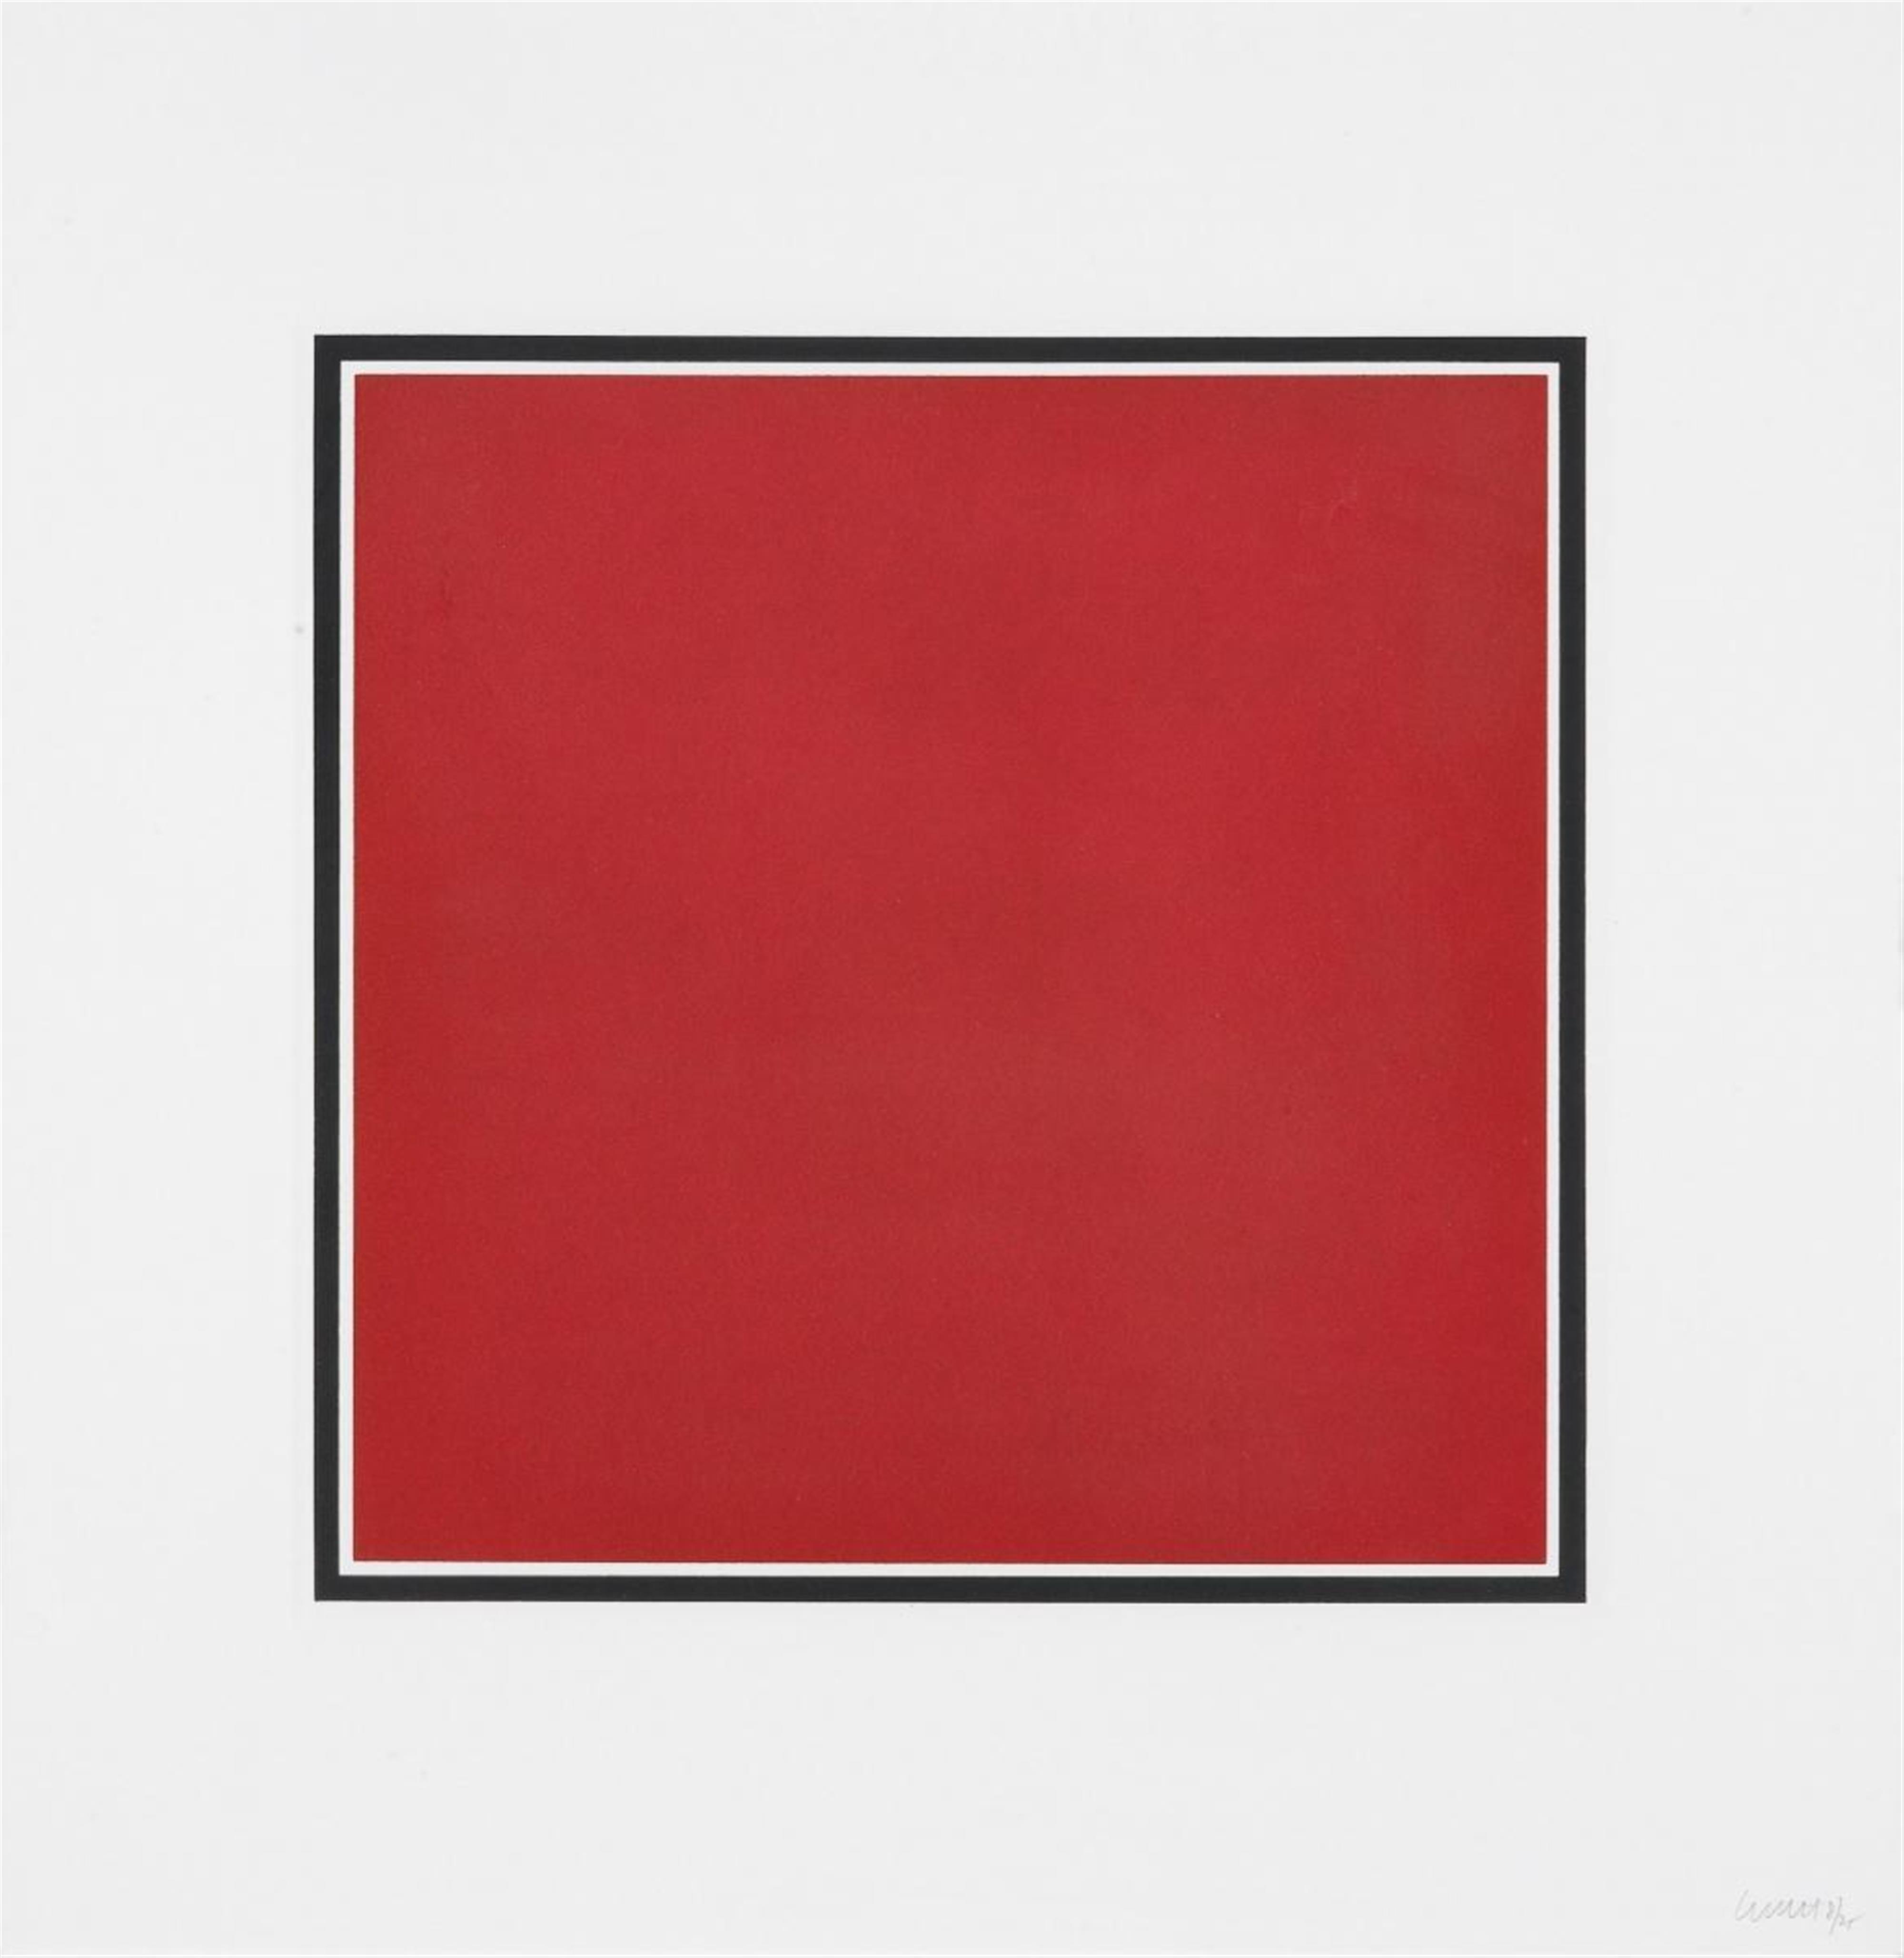 Sol LeWitt - Red, yellow, blue and gray squares, bordered by a black band - image-1